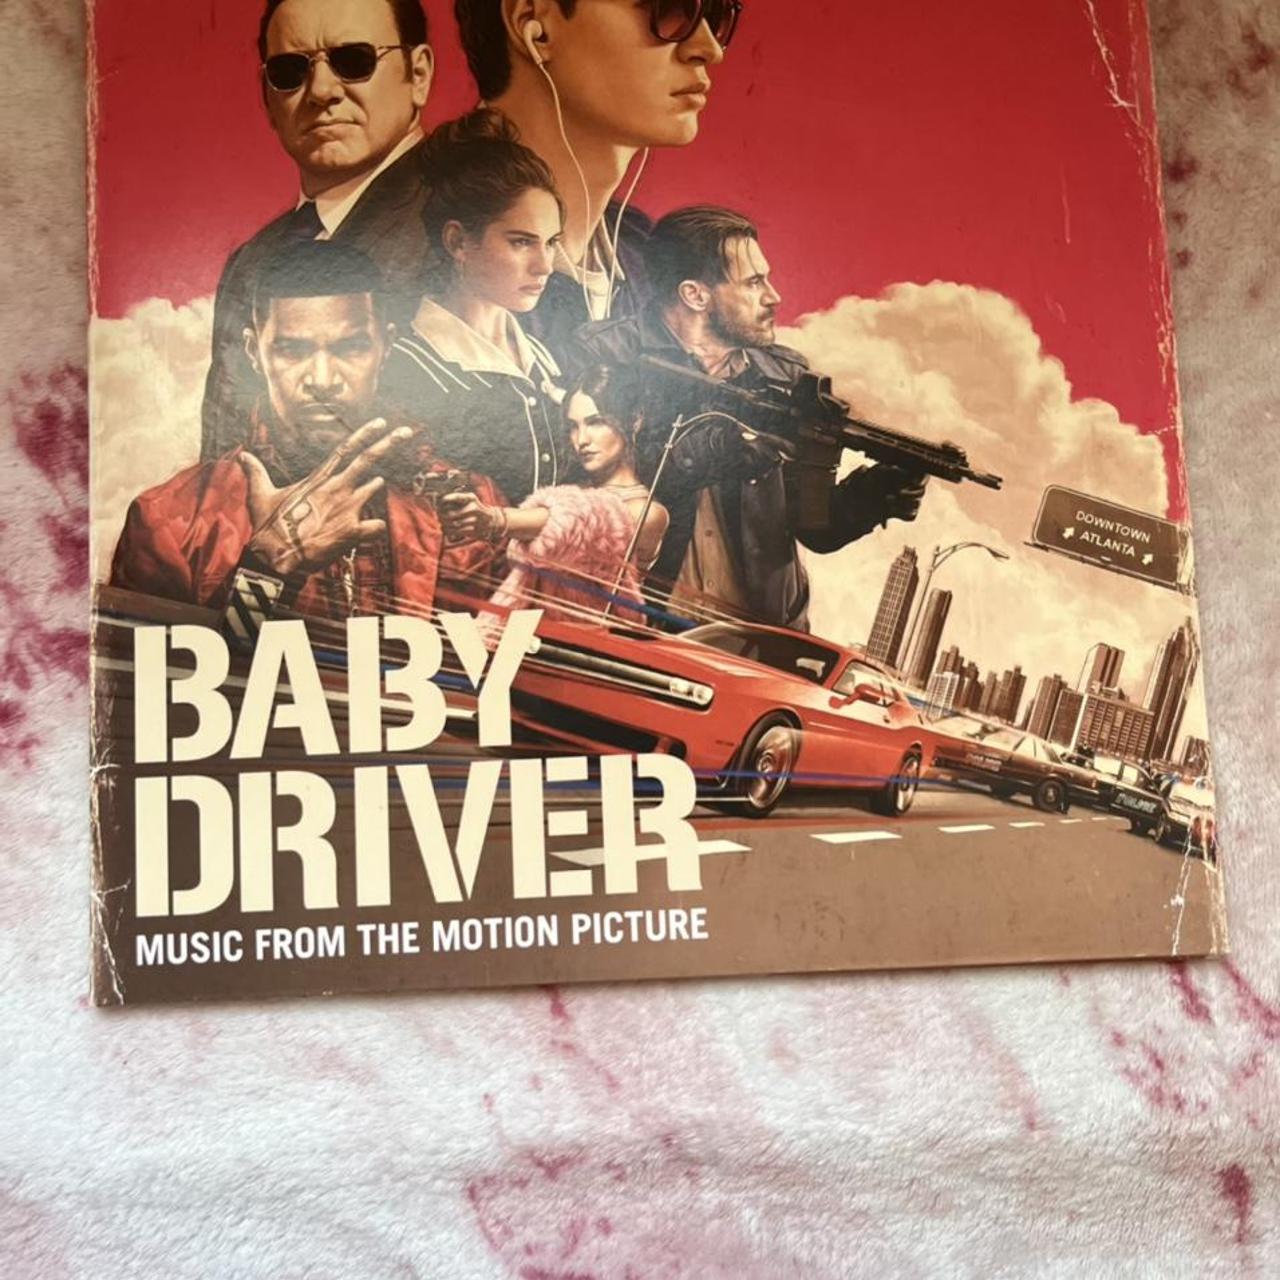 baby driver soundtrack song list